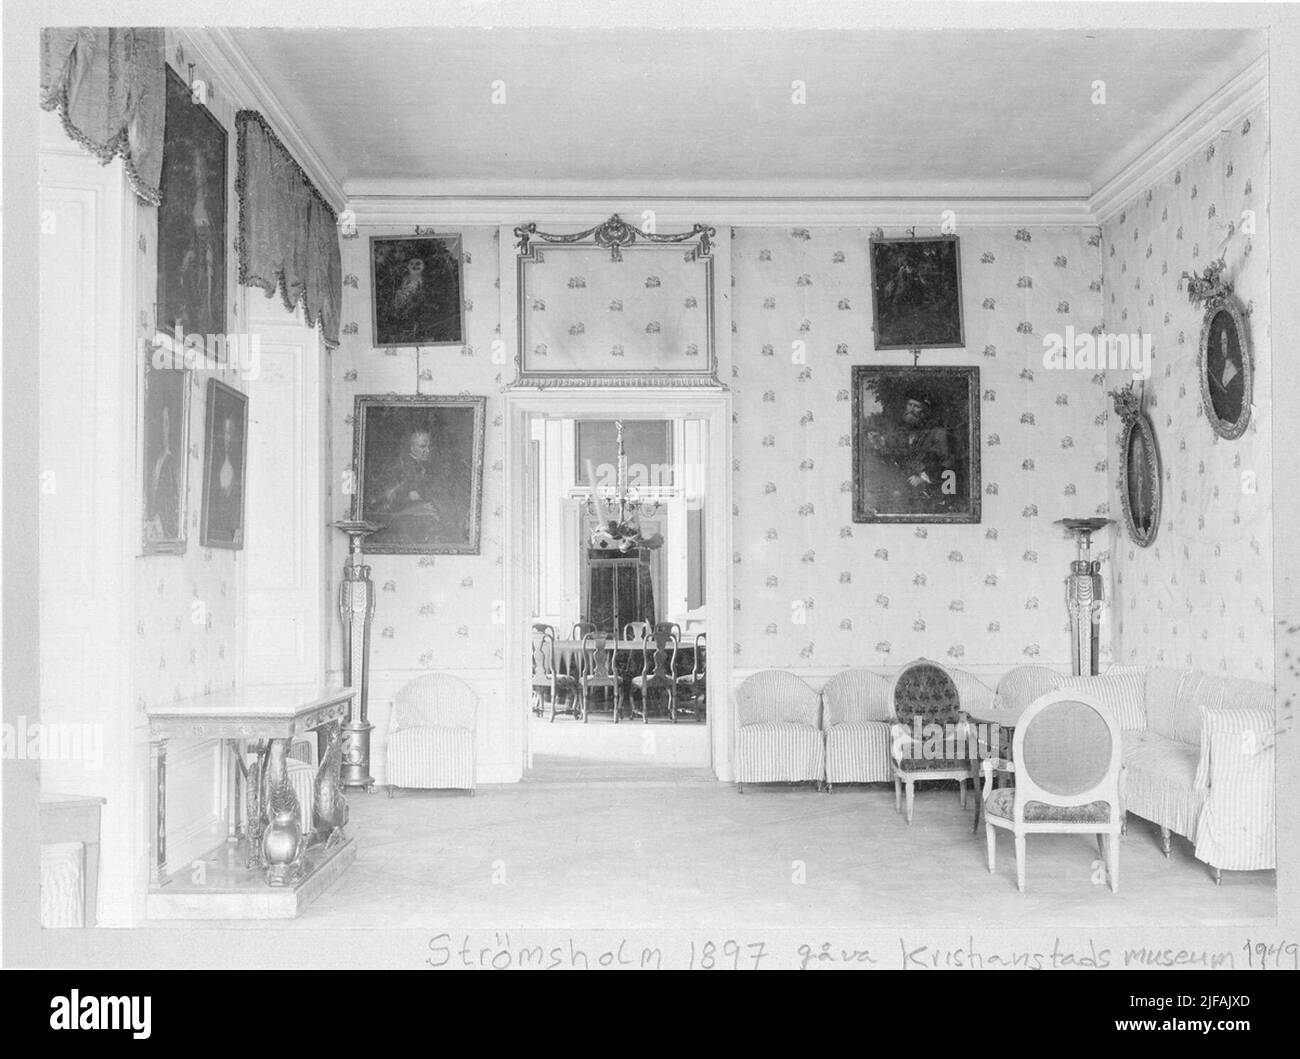 Stromsholm castle Black and White Stock Photos & Images - Alamy